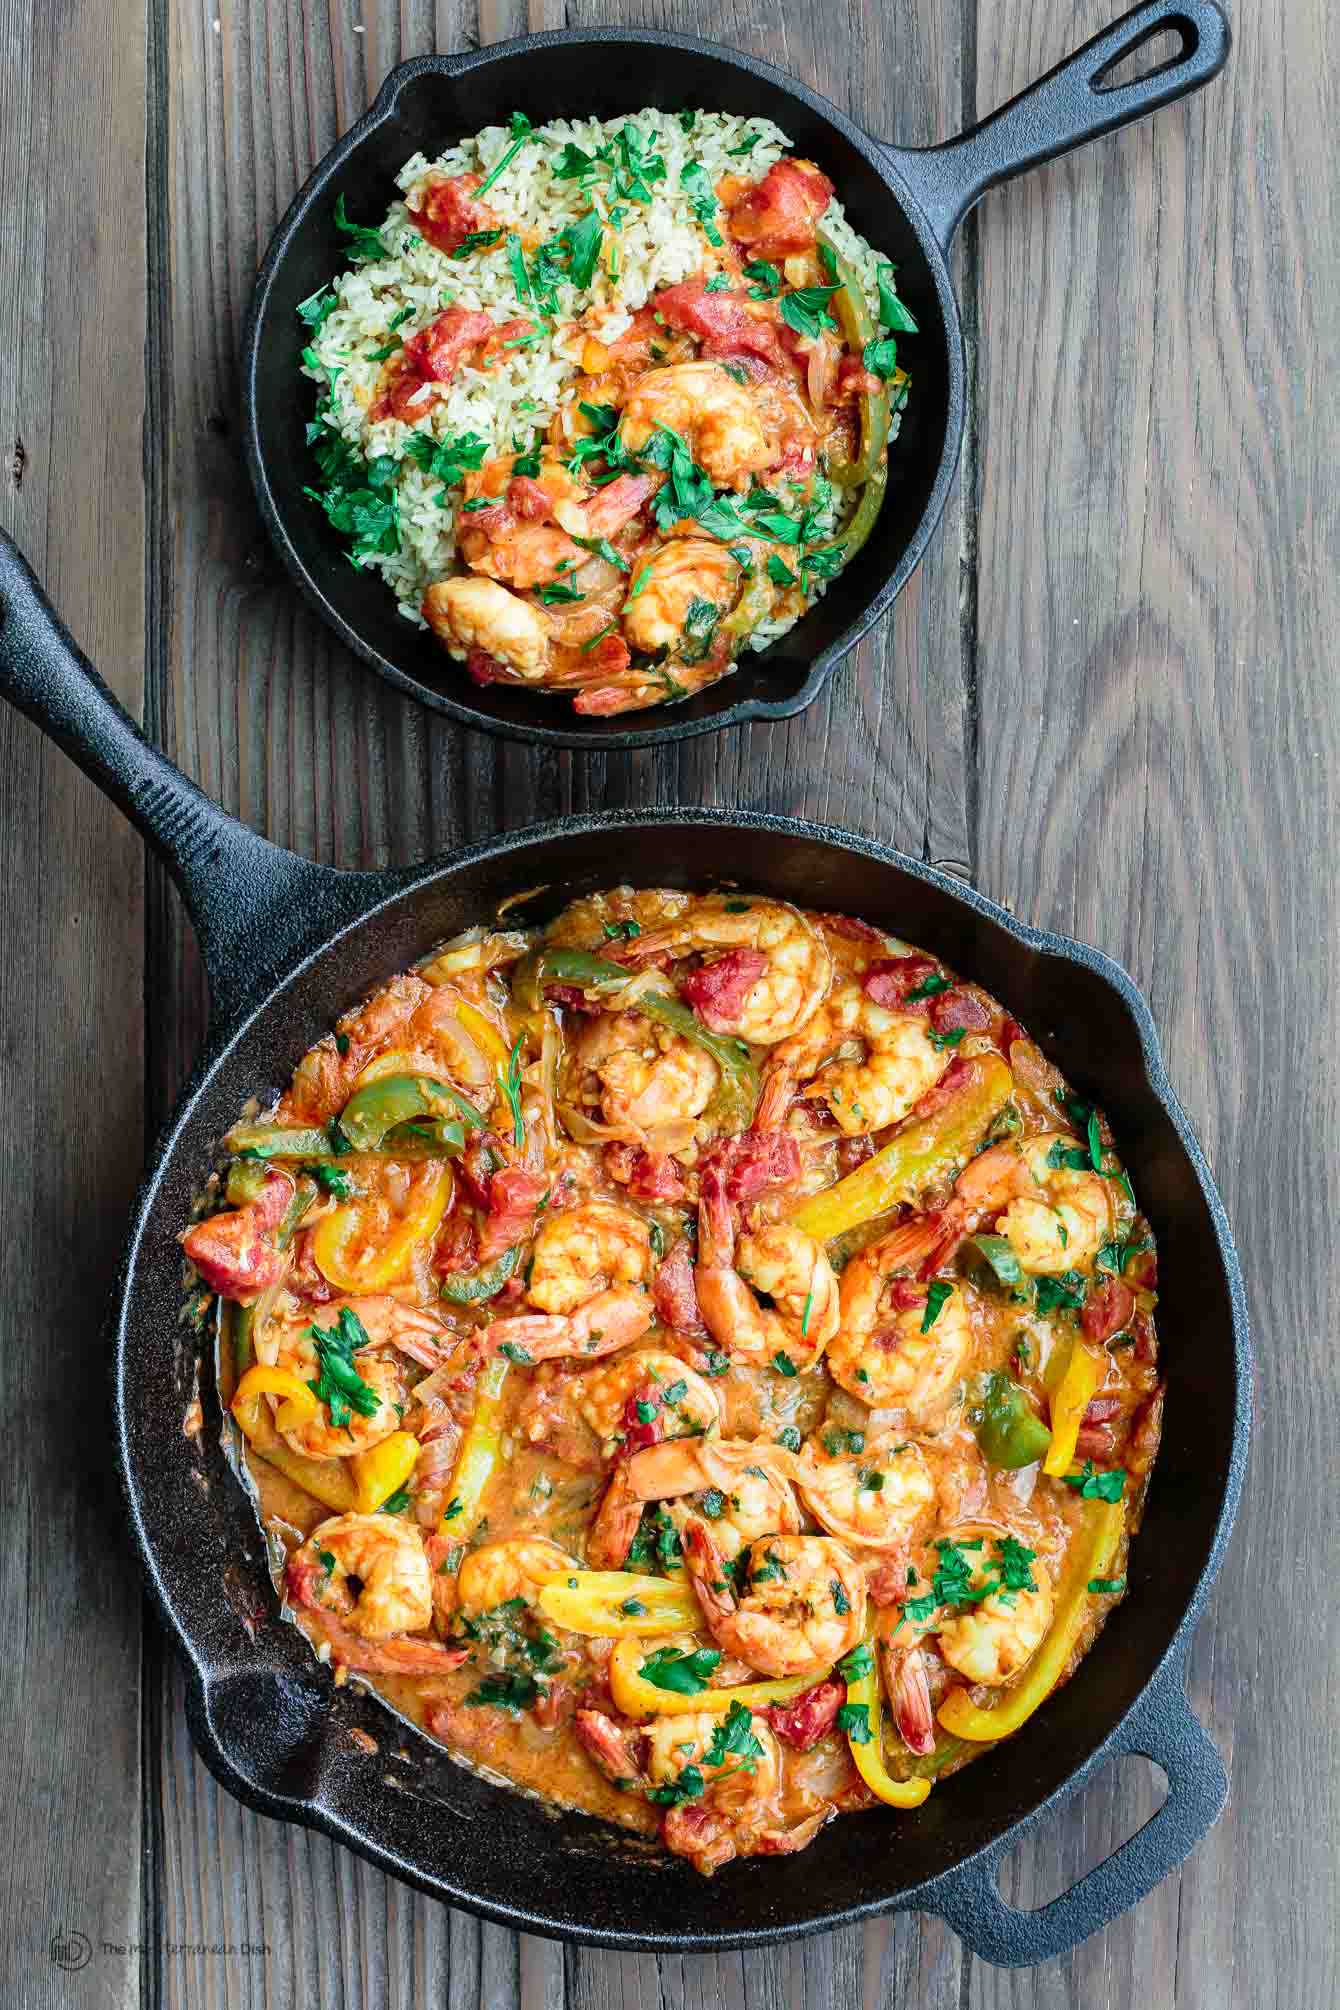 Shrimp in skillet with shallots, bell peppers and a white wine-olive oil sauce